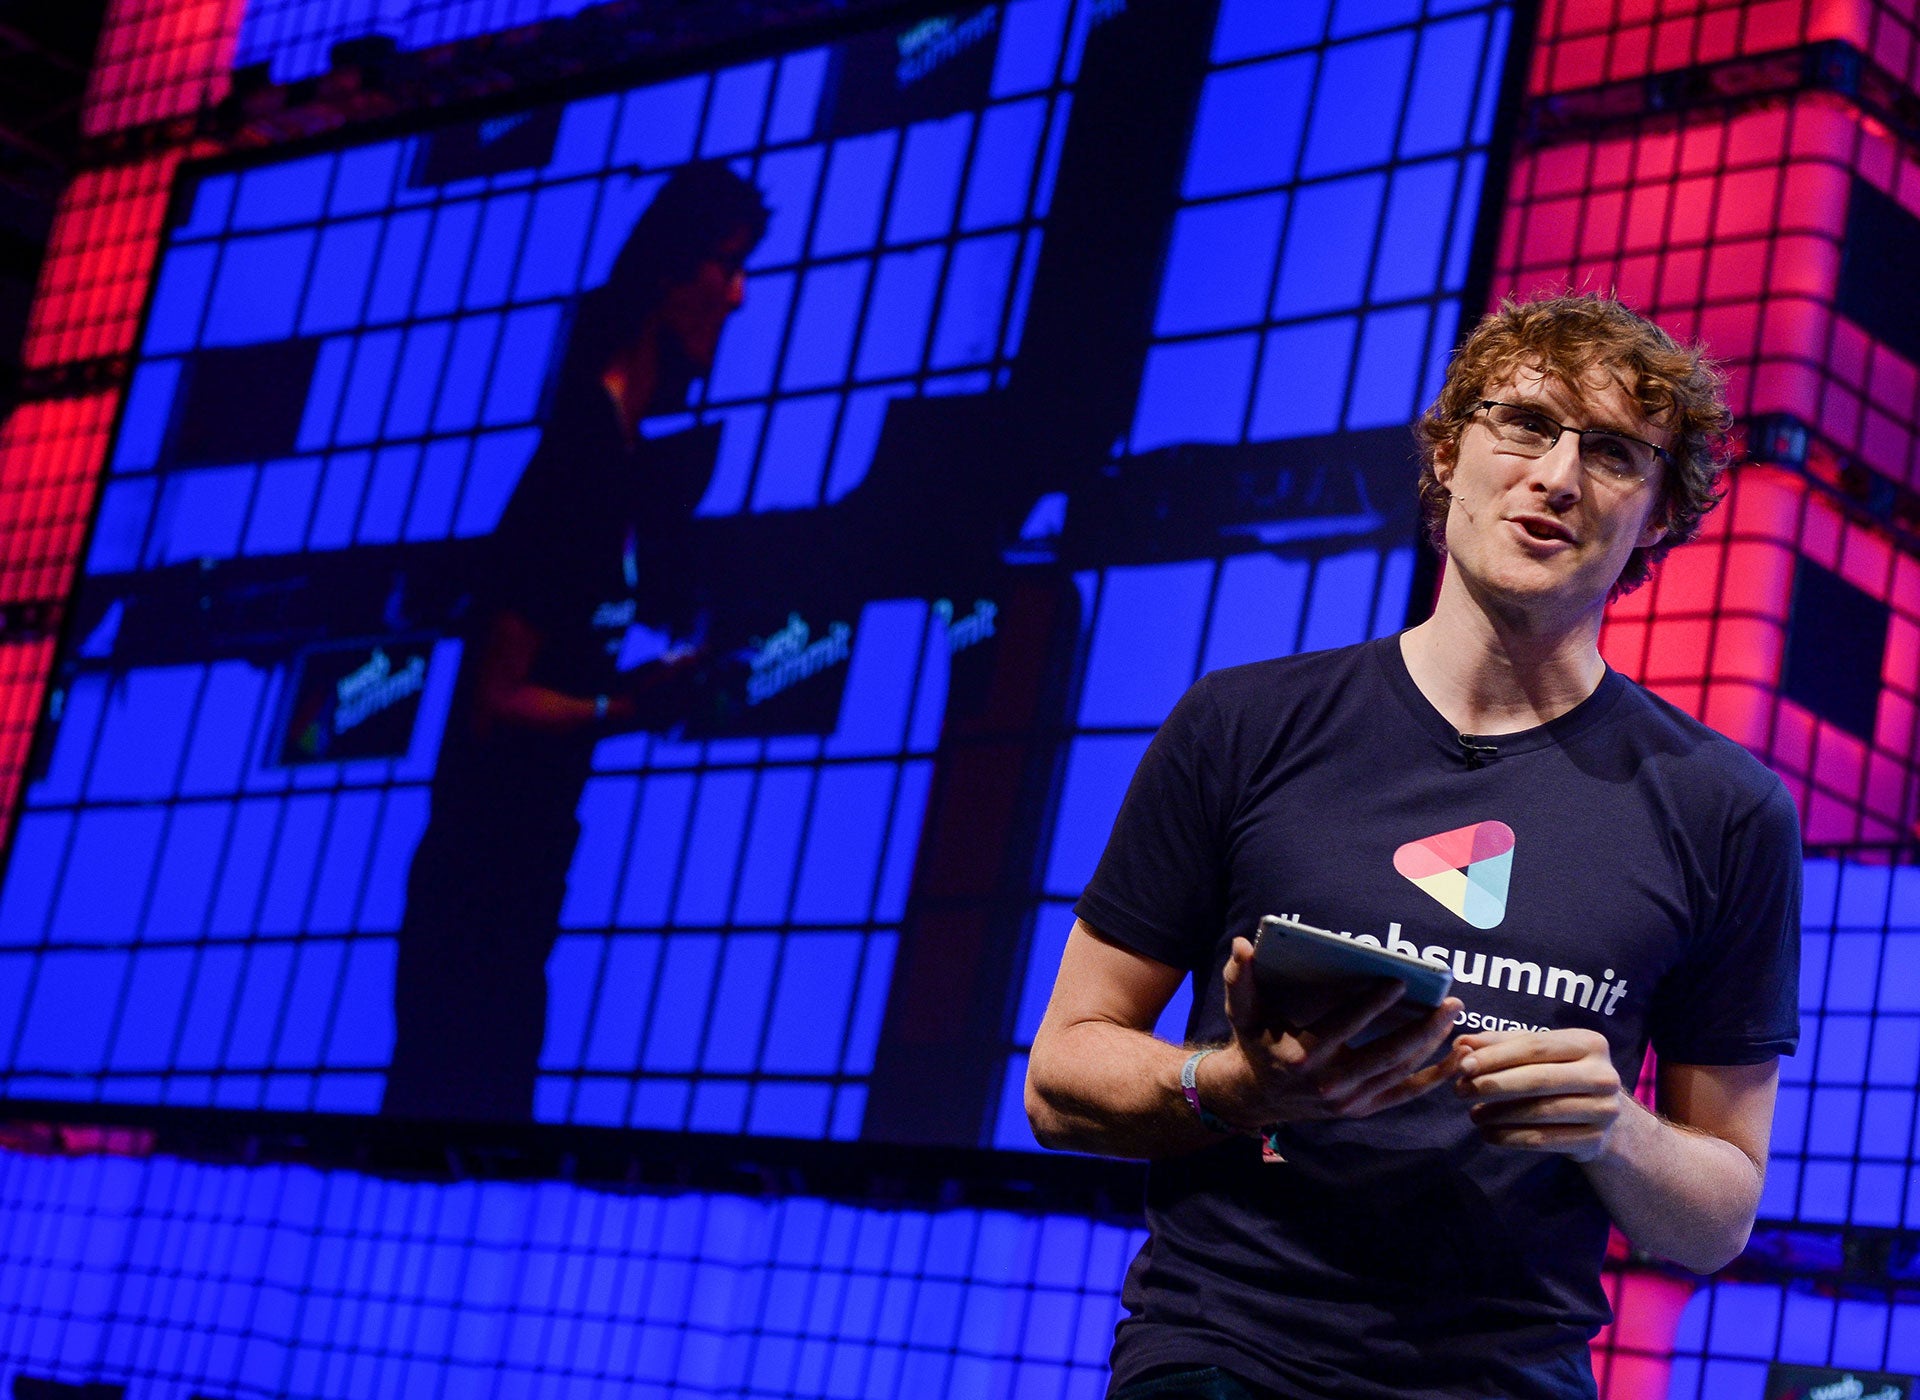 Web Summit CEO: Hybrid virtual-physical events are the future for conferences